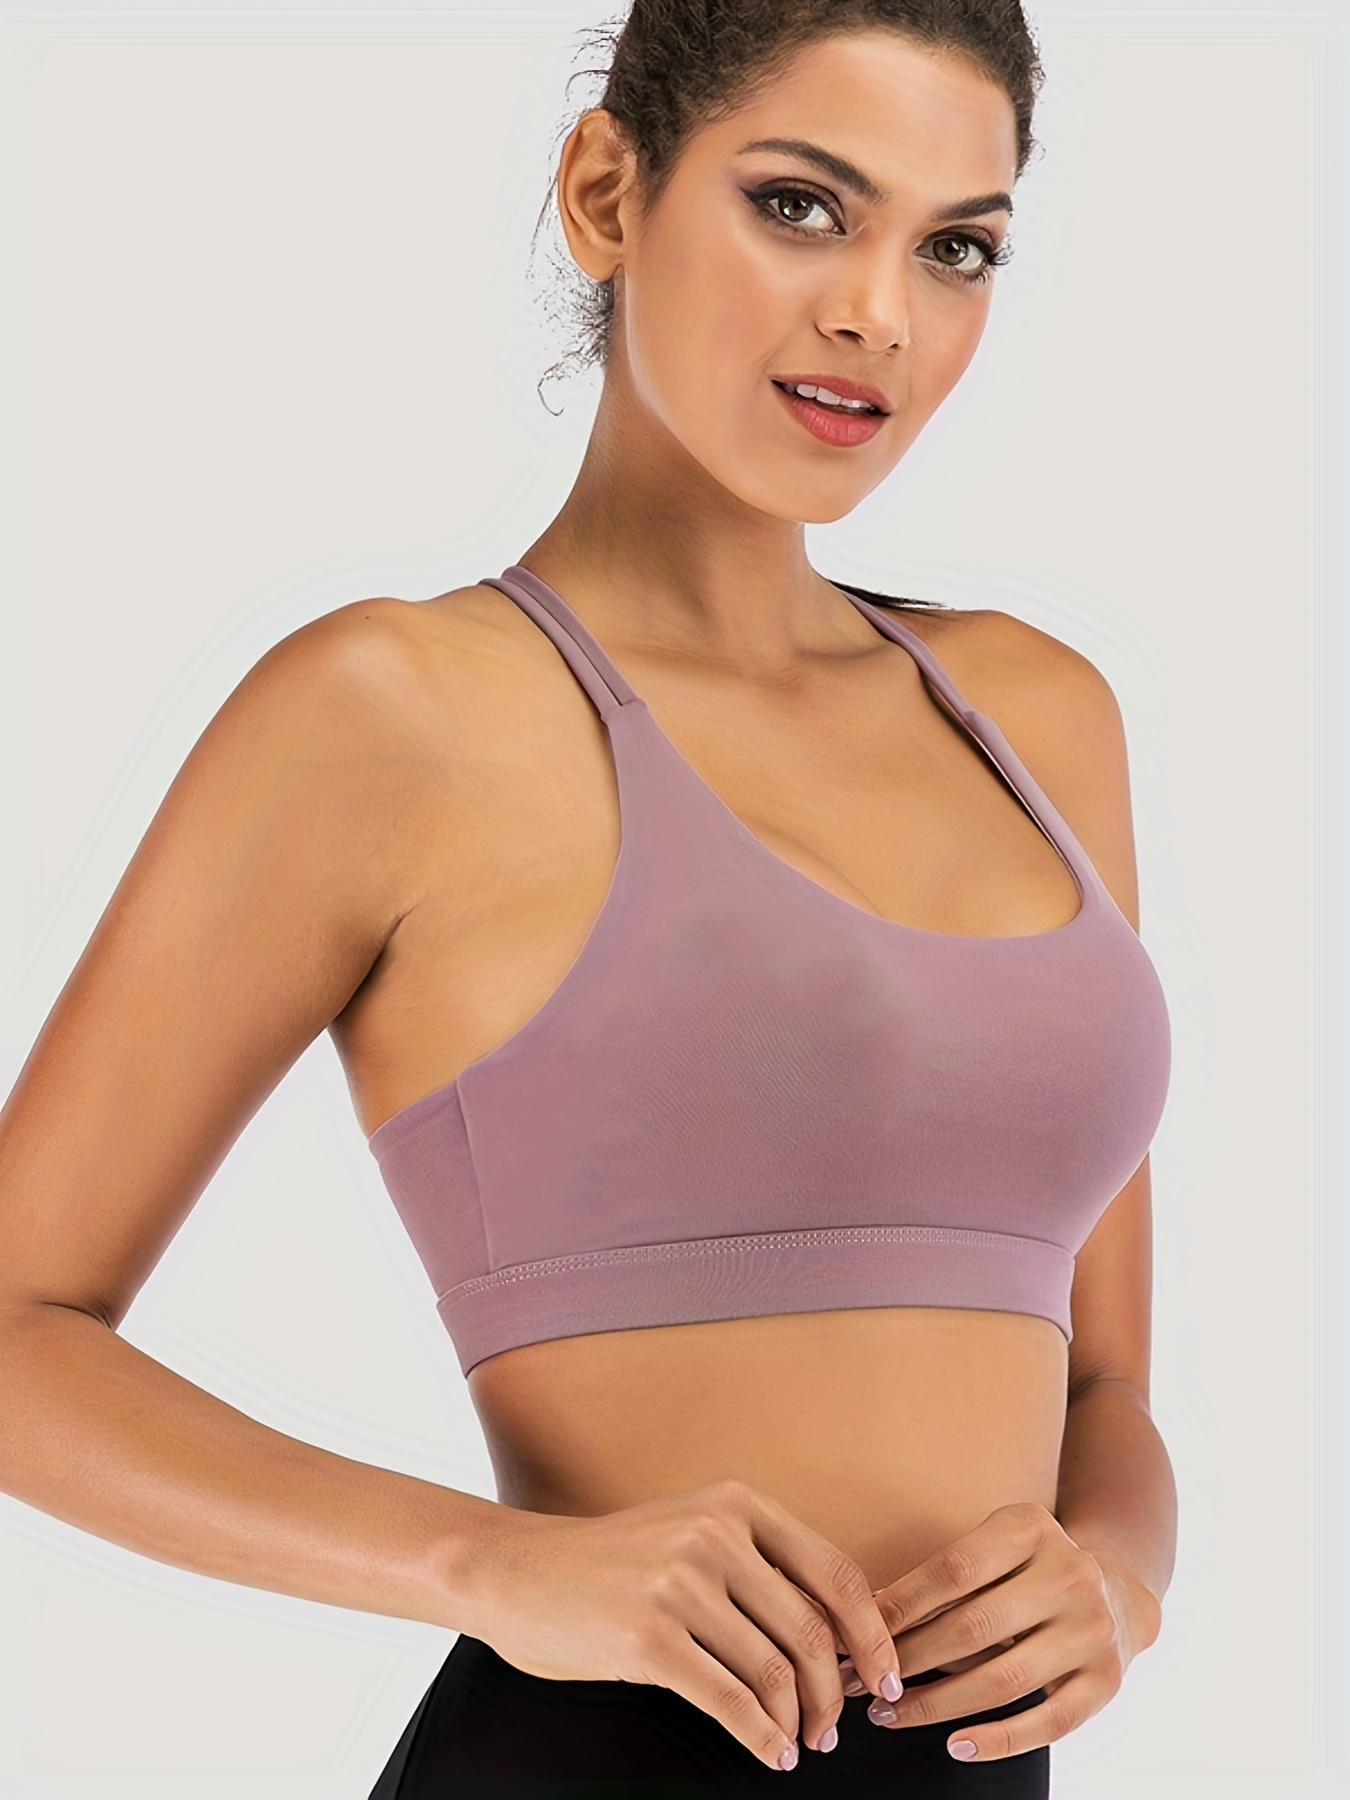 Kydra Erin Fitted Tank (Tags: Crop Top HIIT Gym Racerback), Women's  Fashion, Activewear on Carousell